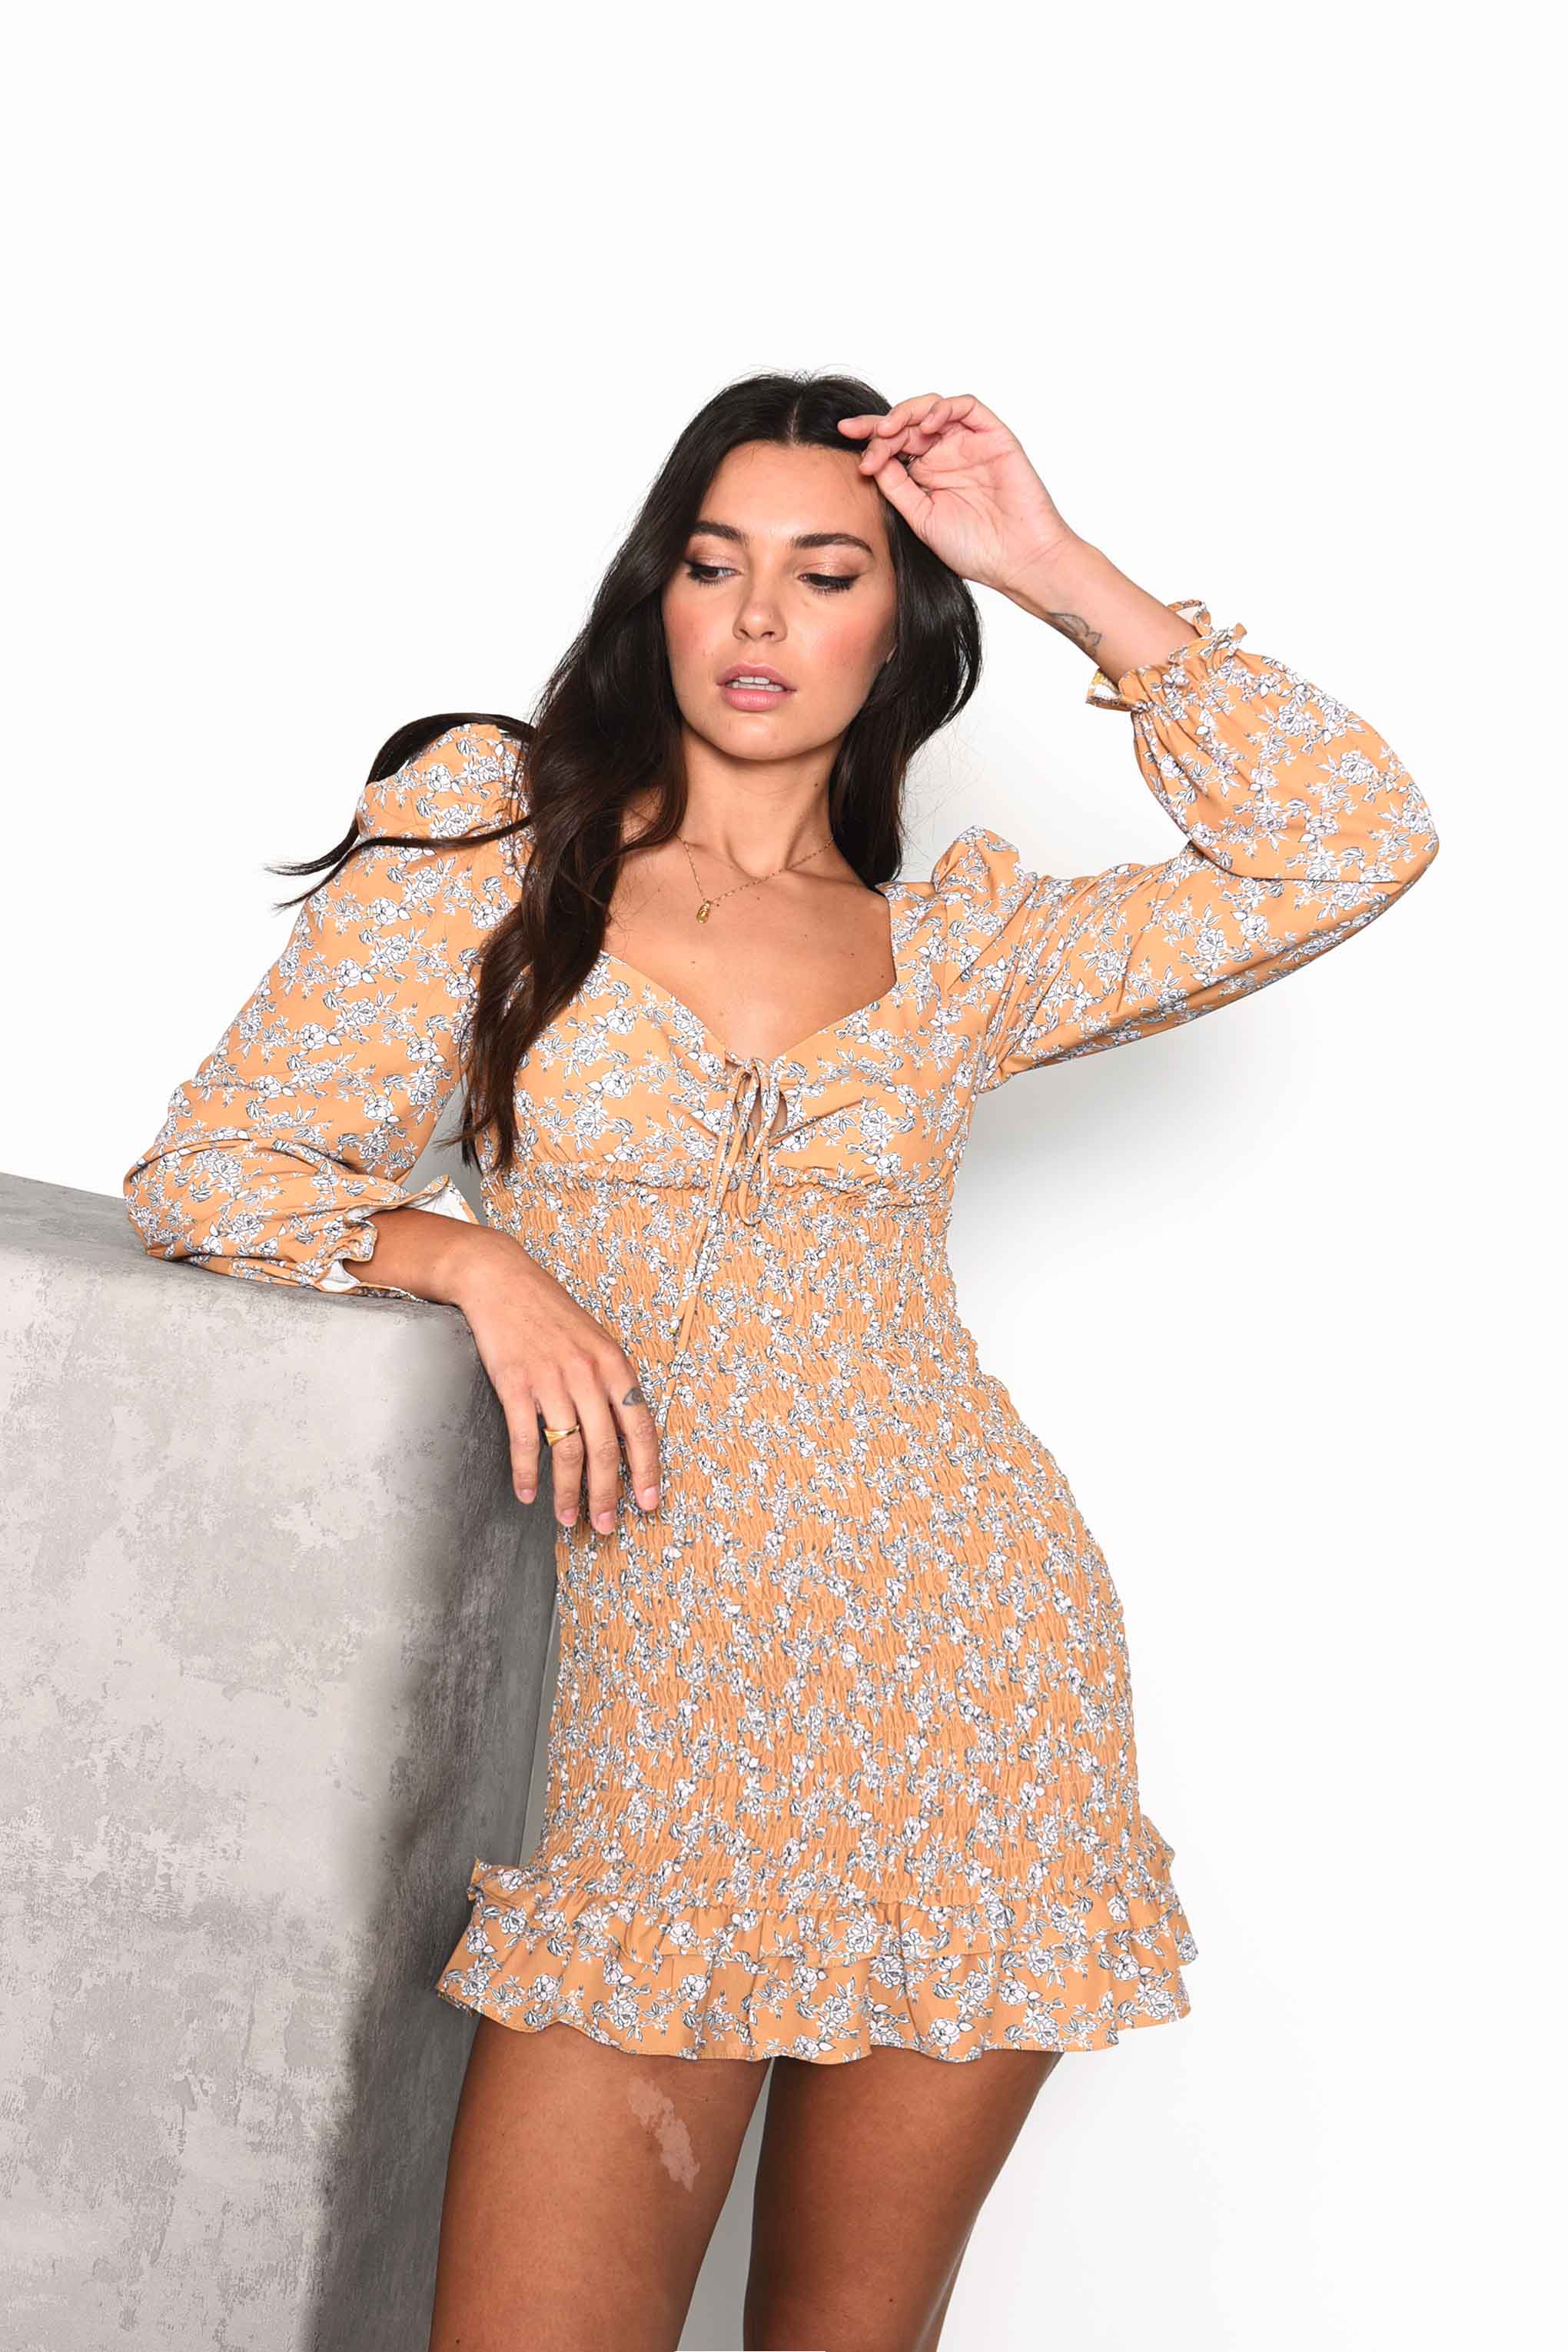 Glamorous Ochre Floral Smocked Mini Dress with Full Length Puff Sleeves and Frill Hem